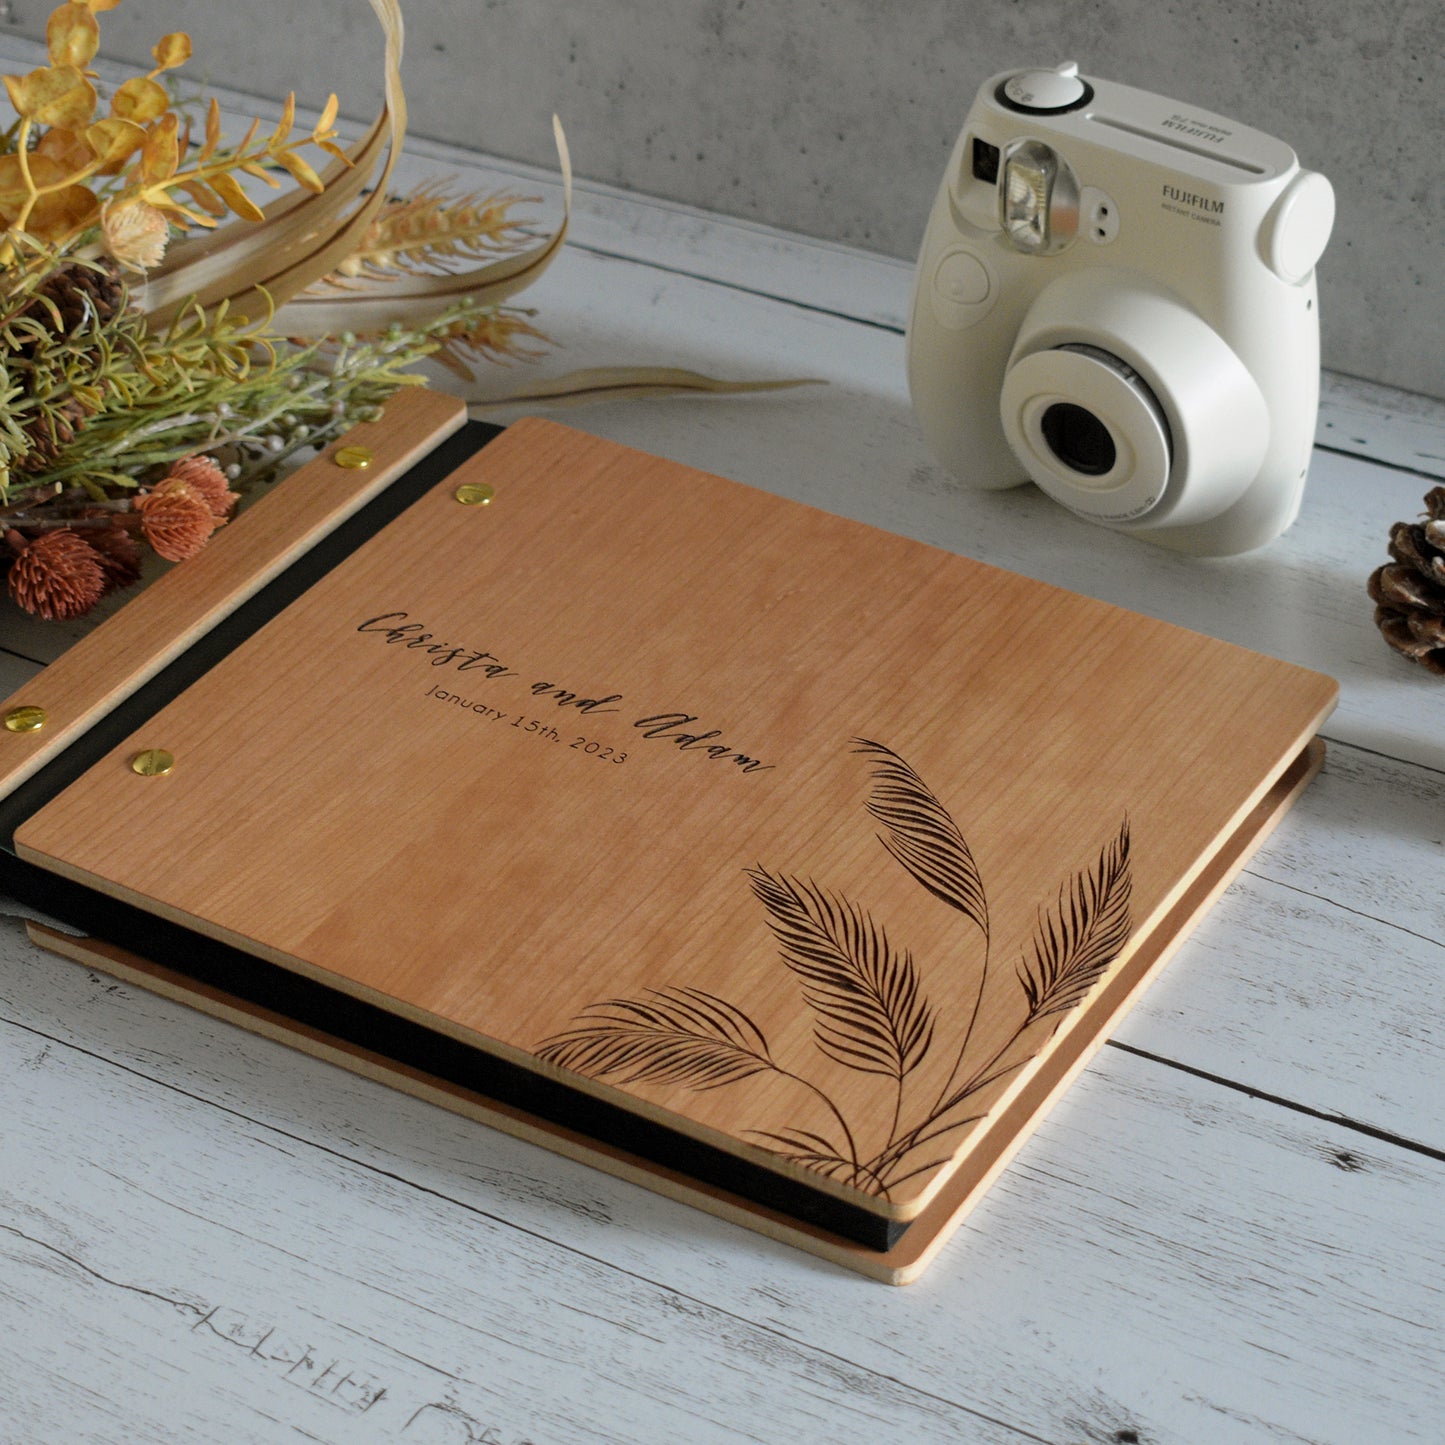 An 8.5x11" guest book lies on a table. Made of cherry wood, black vegan leather binding, and copper hardware. The front cover reads “Christina and Adam, January 15th, 2023.” 